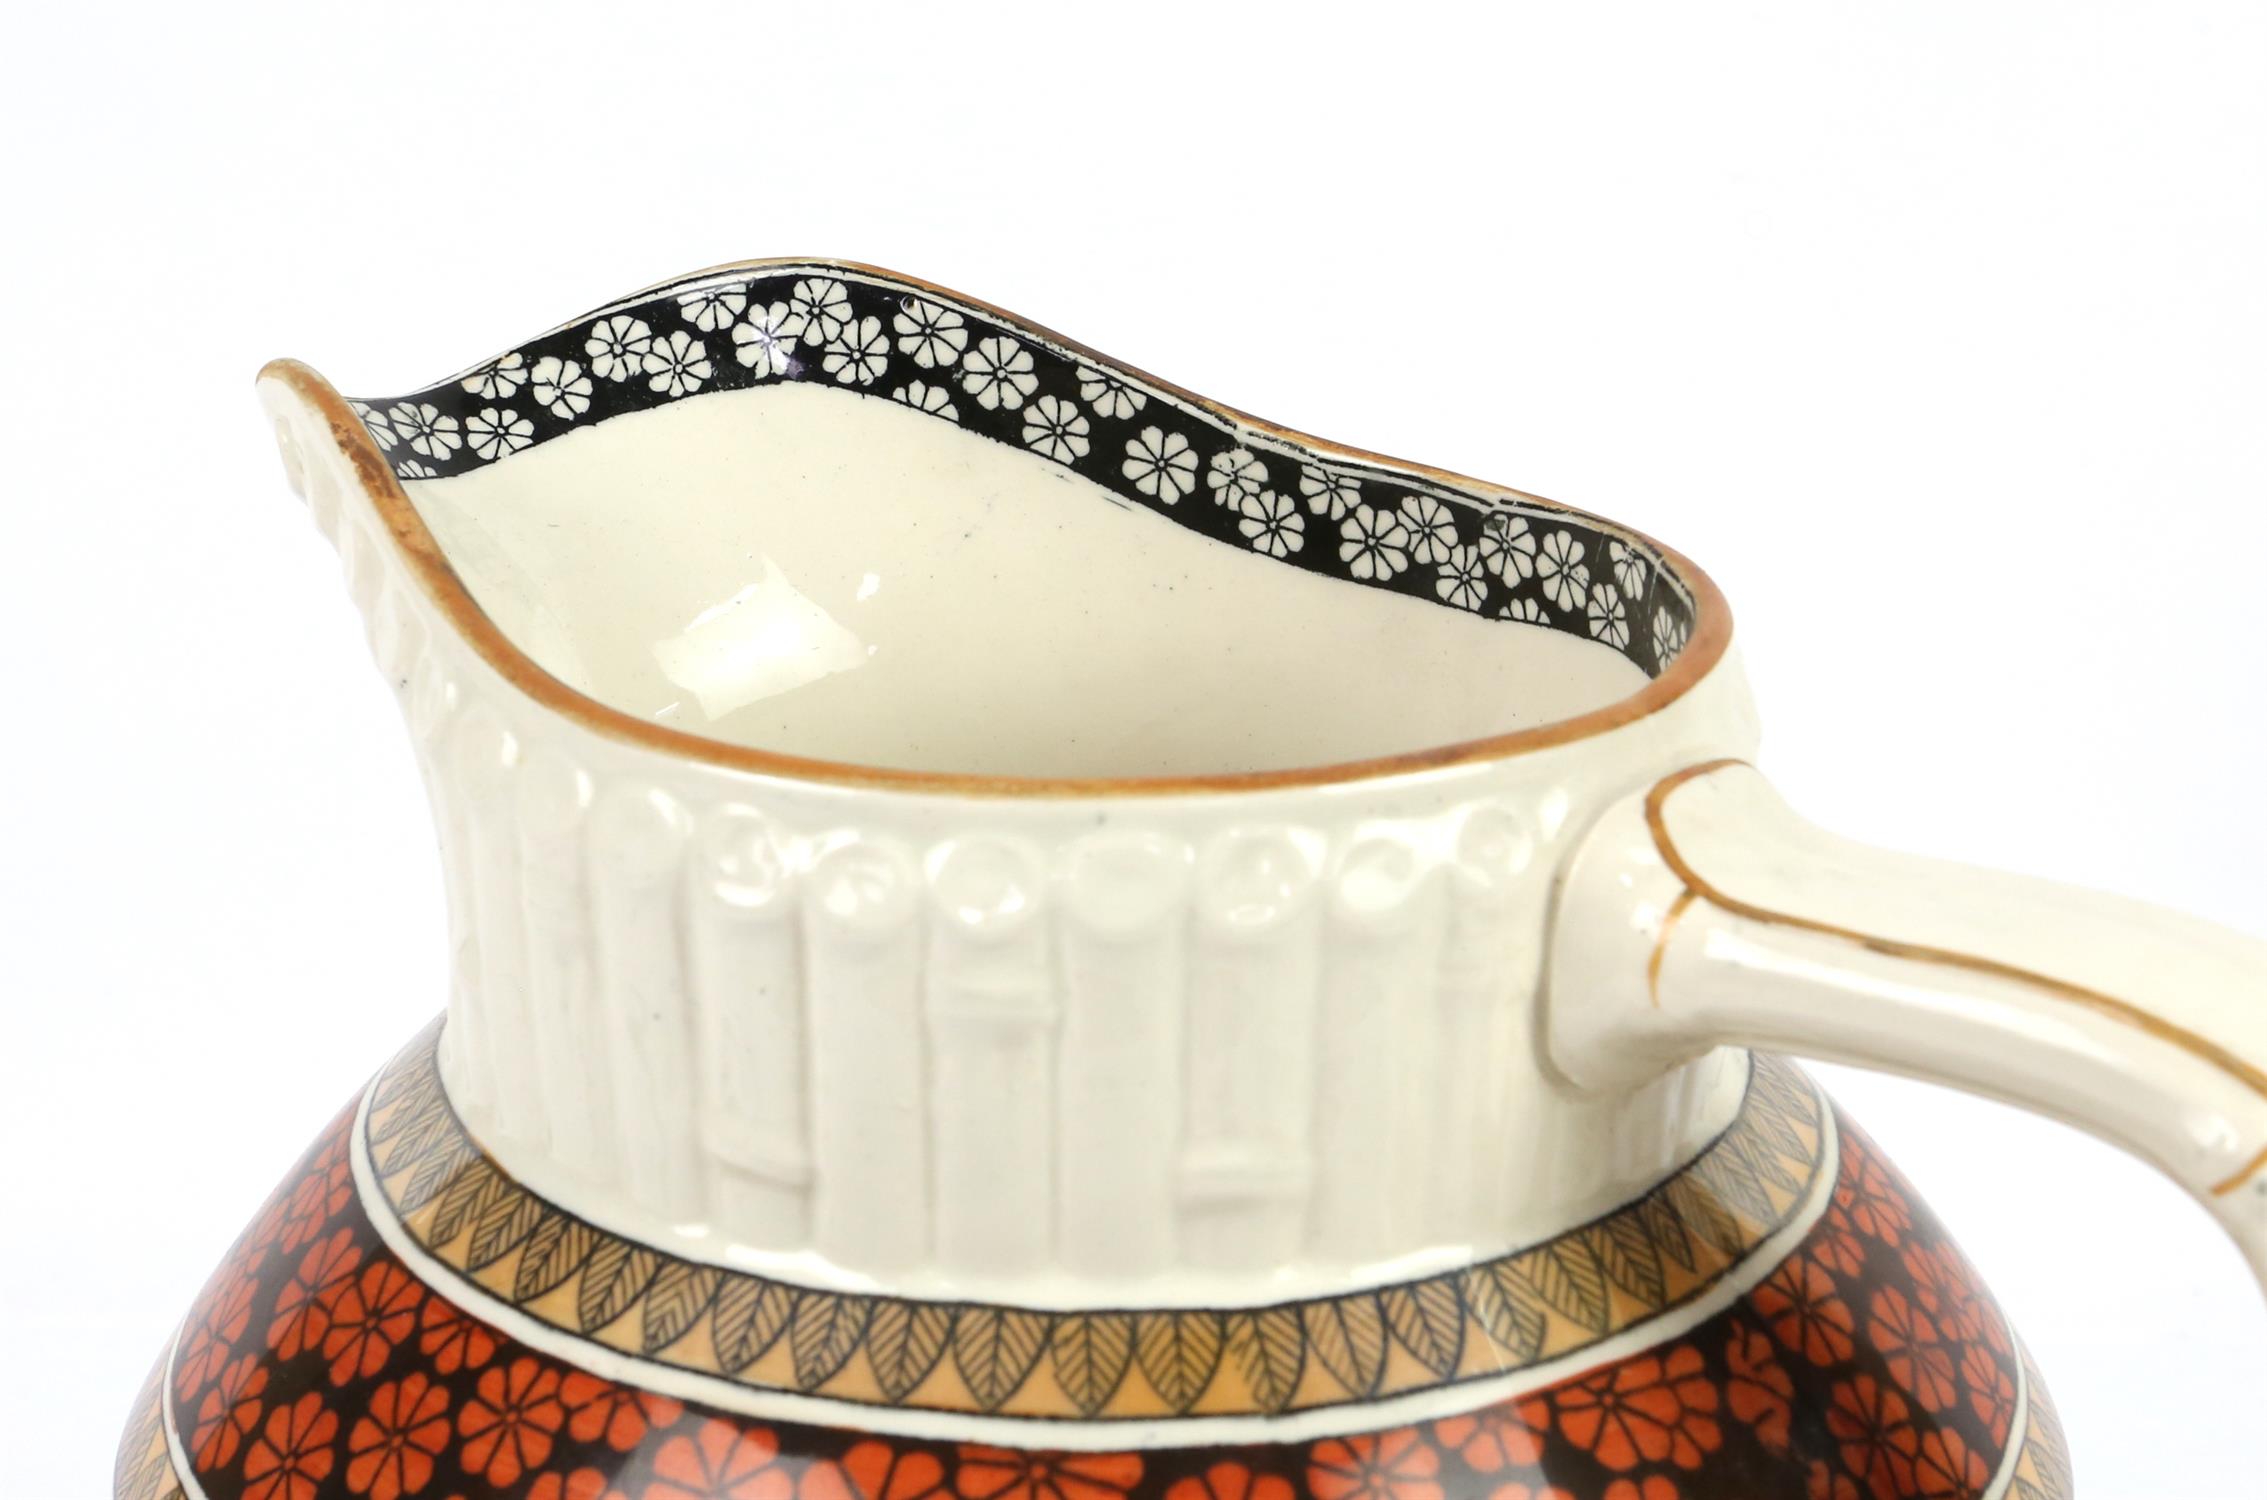 Copeland 'The Ashburne' Aesthetic movement washbowl and jug, the sides moulded in bamboo pattern, - Image 9 of 22